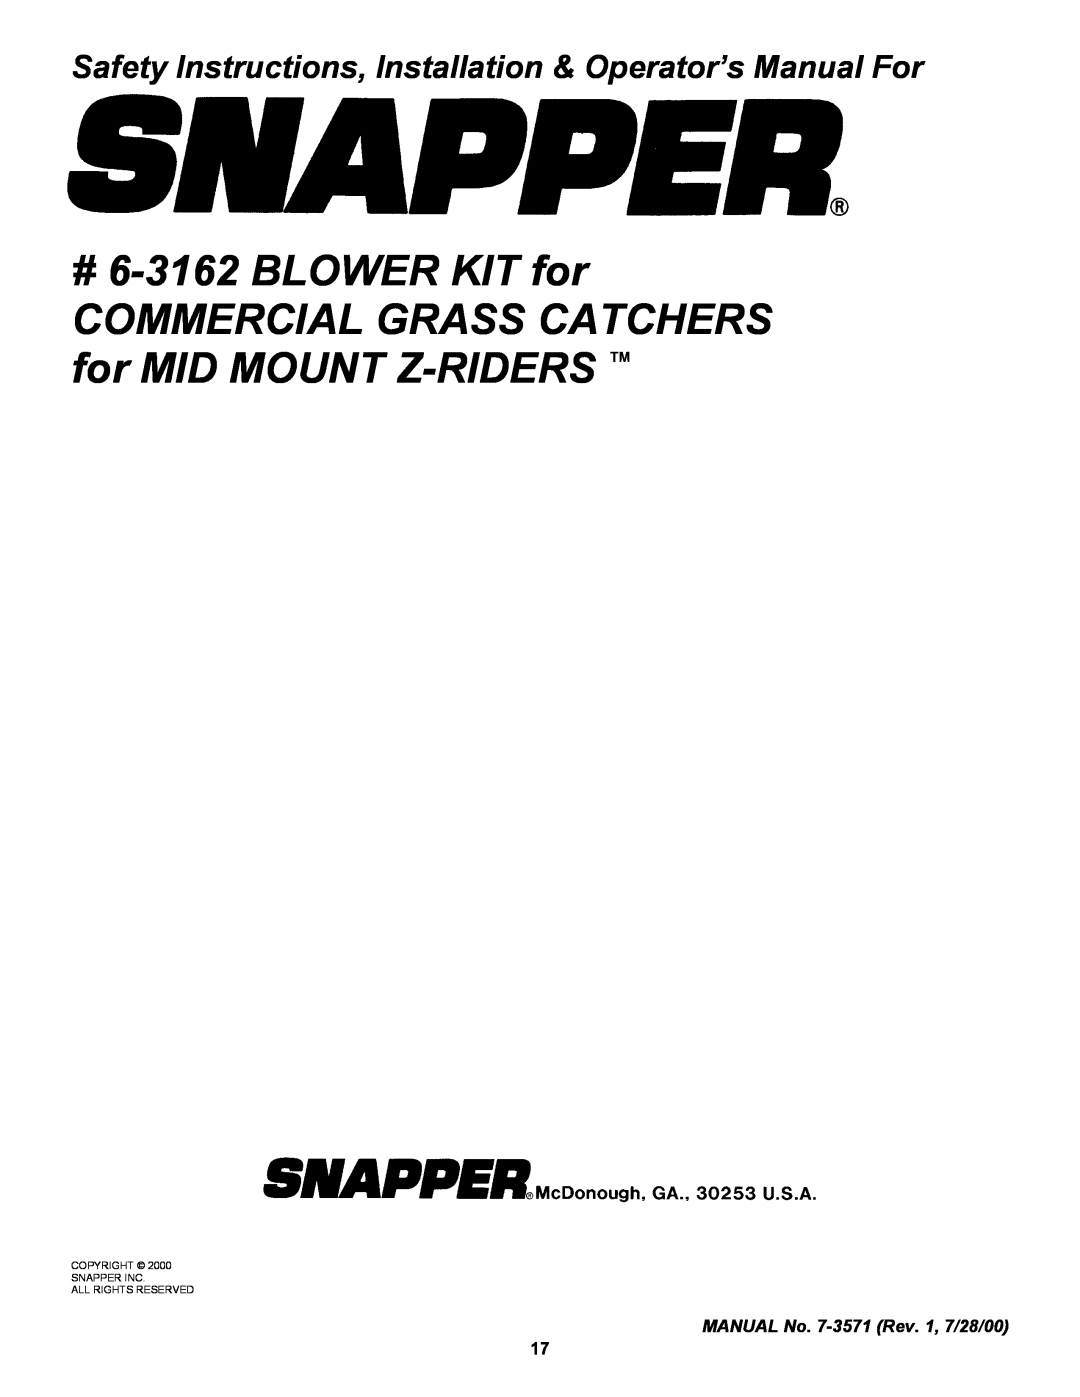 Snapper manual #6-3162BLOWER KIT for, MANUAL No. 7-3571Rev. 1, 7/28/00, Copyright Snapper Inc All Rights Reserved 